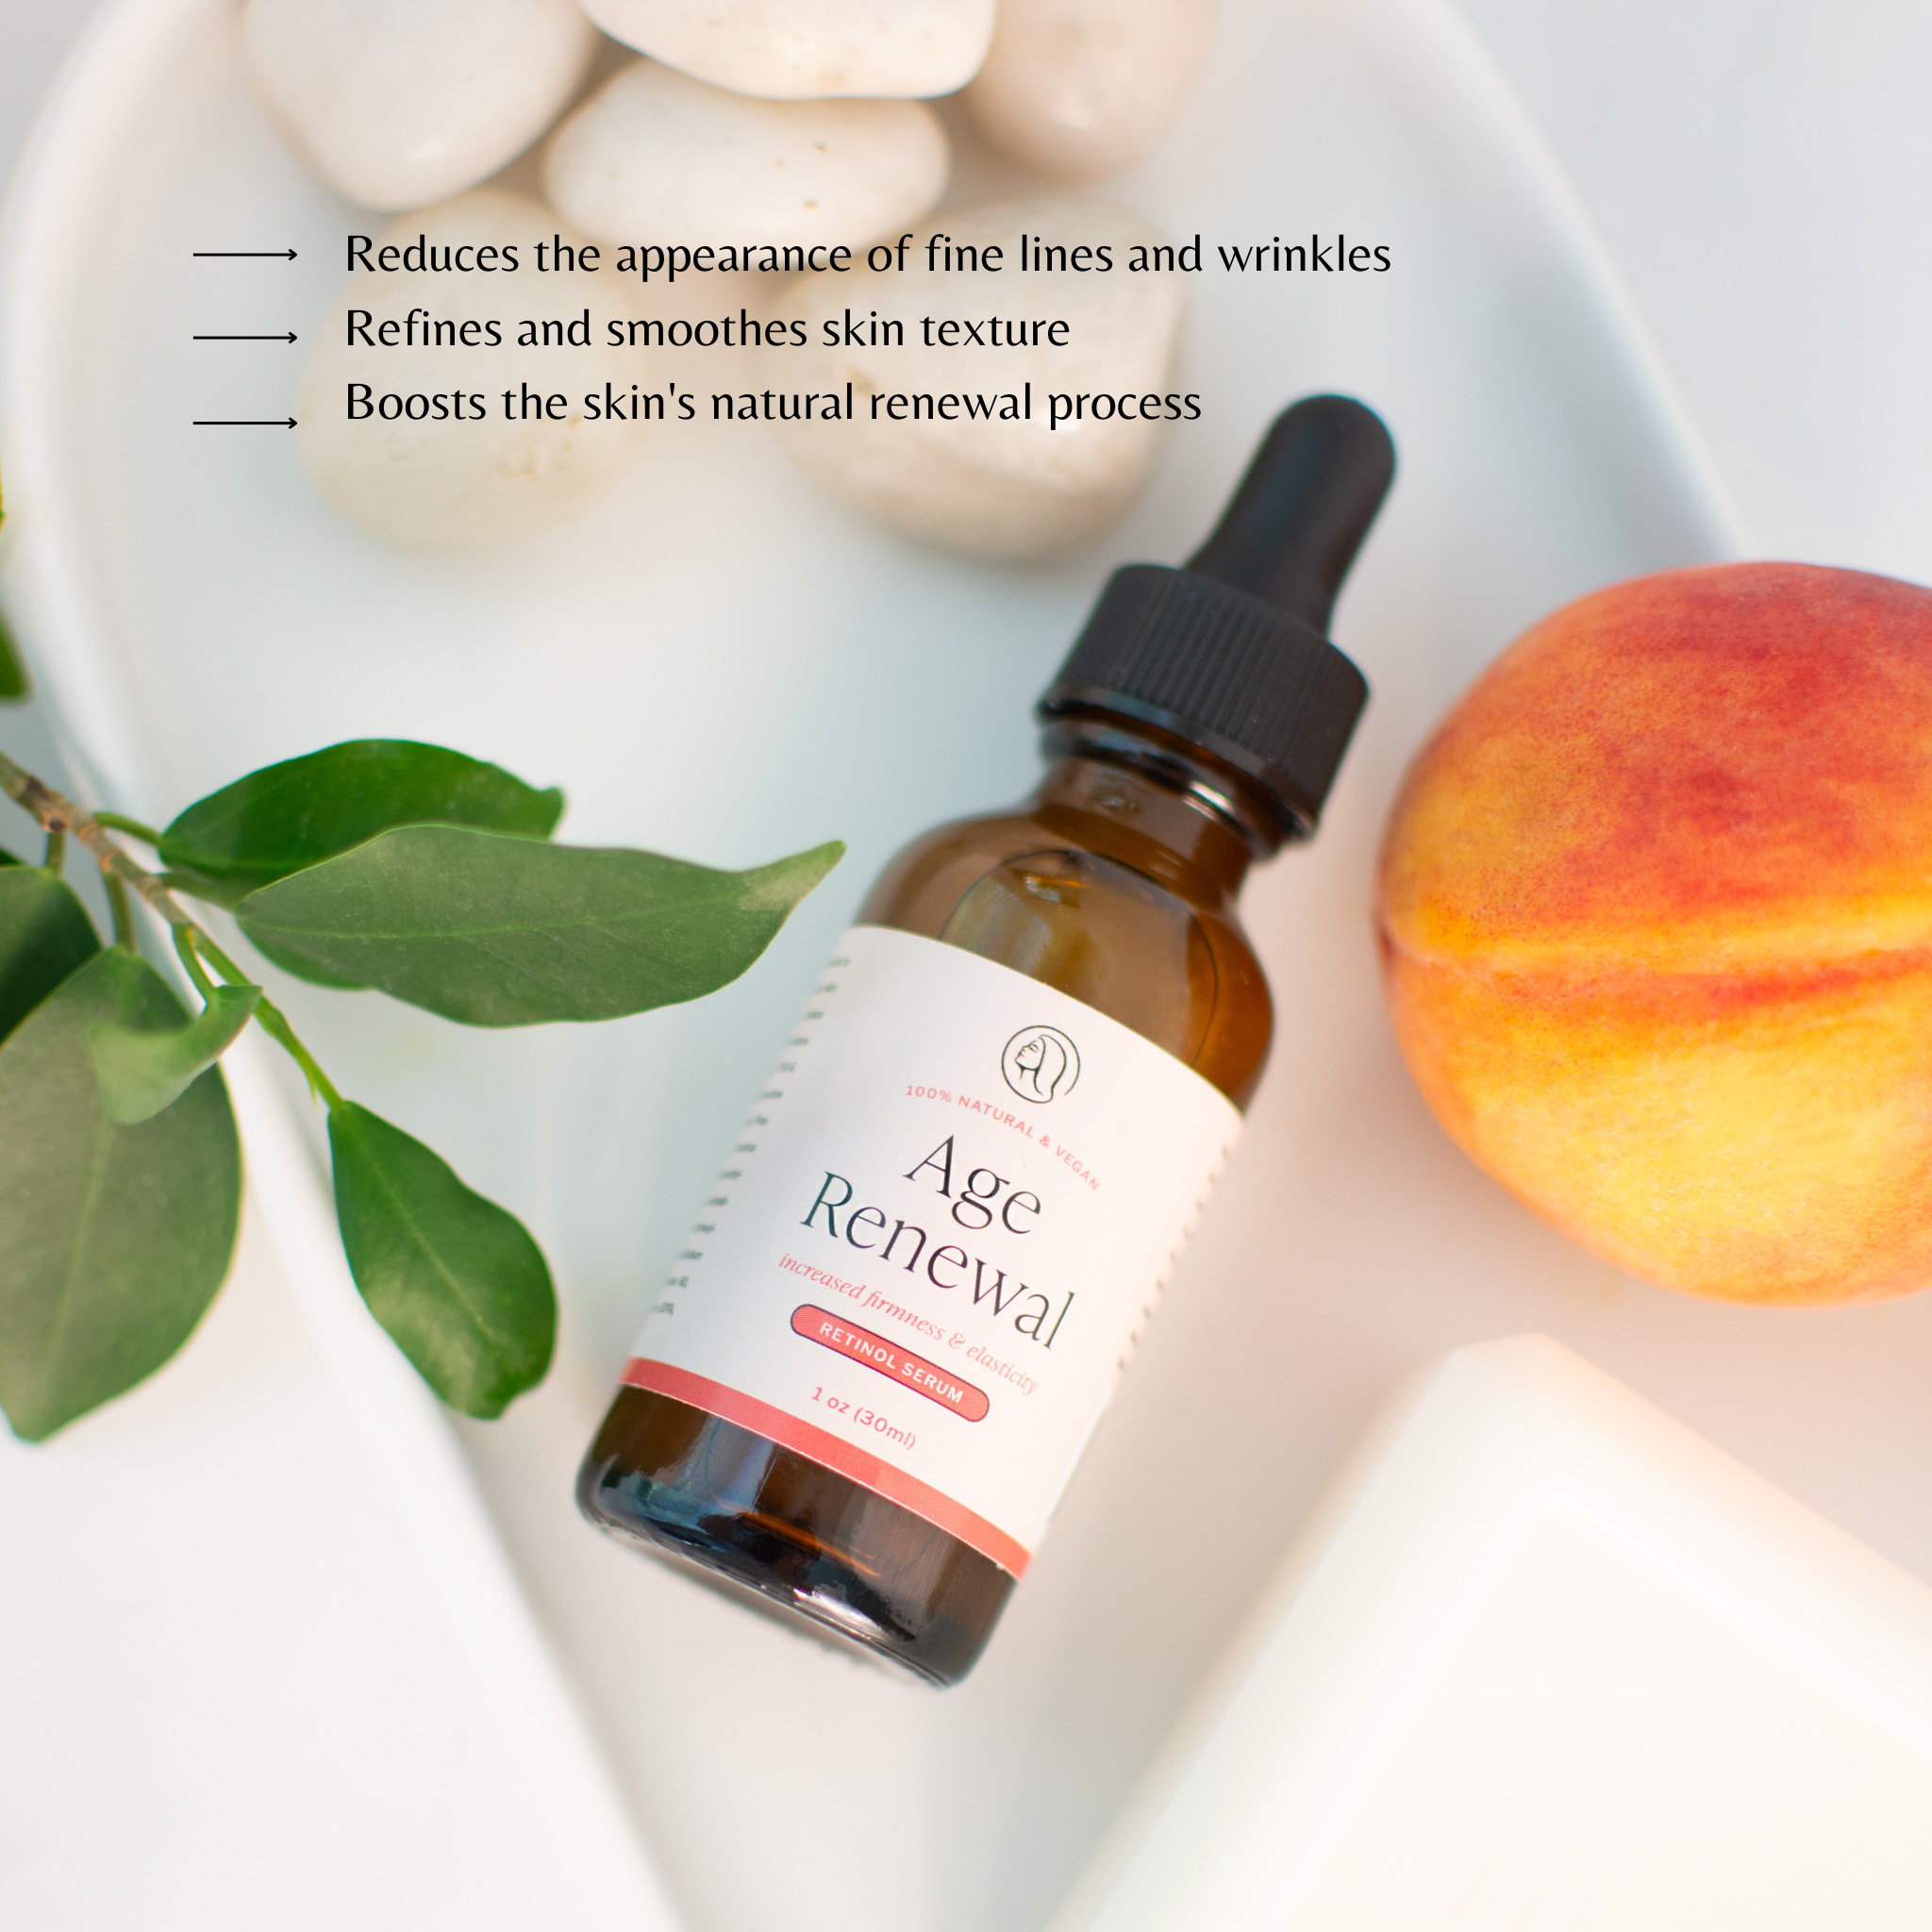 Age Renewal - Retinol Serum from Mavian Beauty with peach and leaves